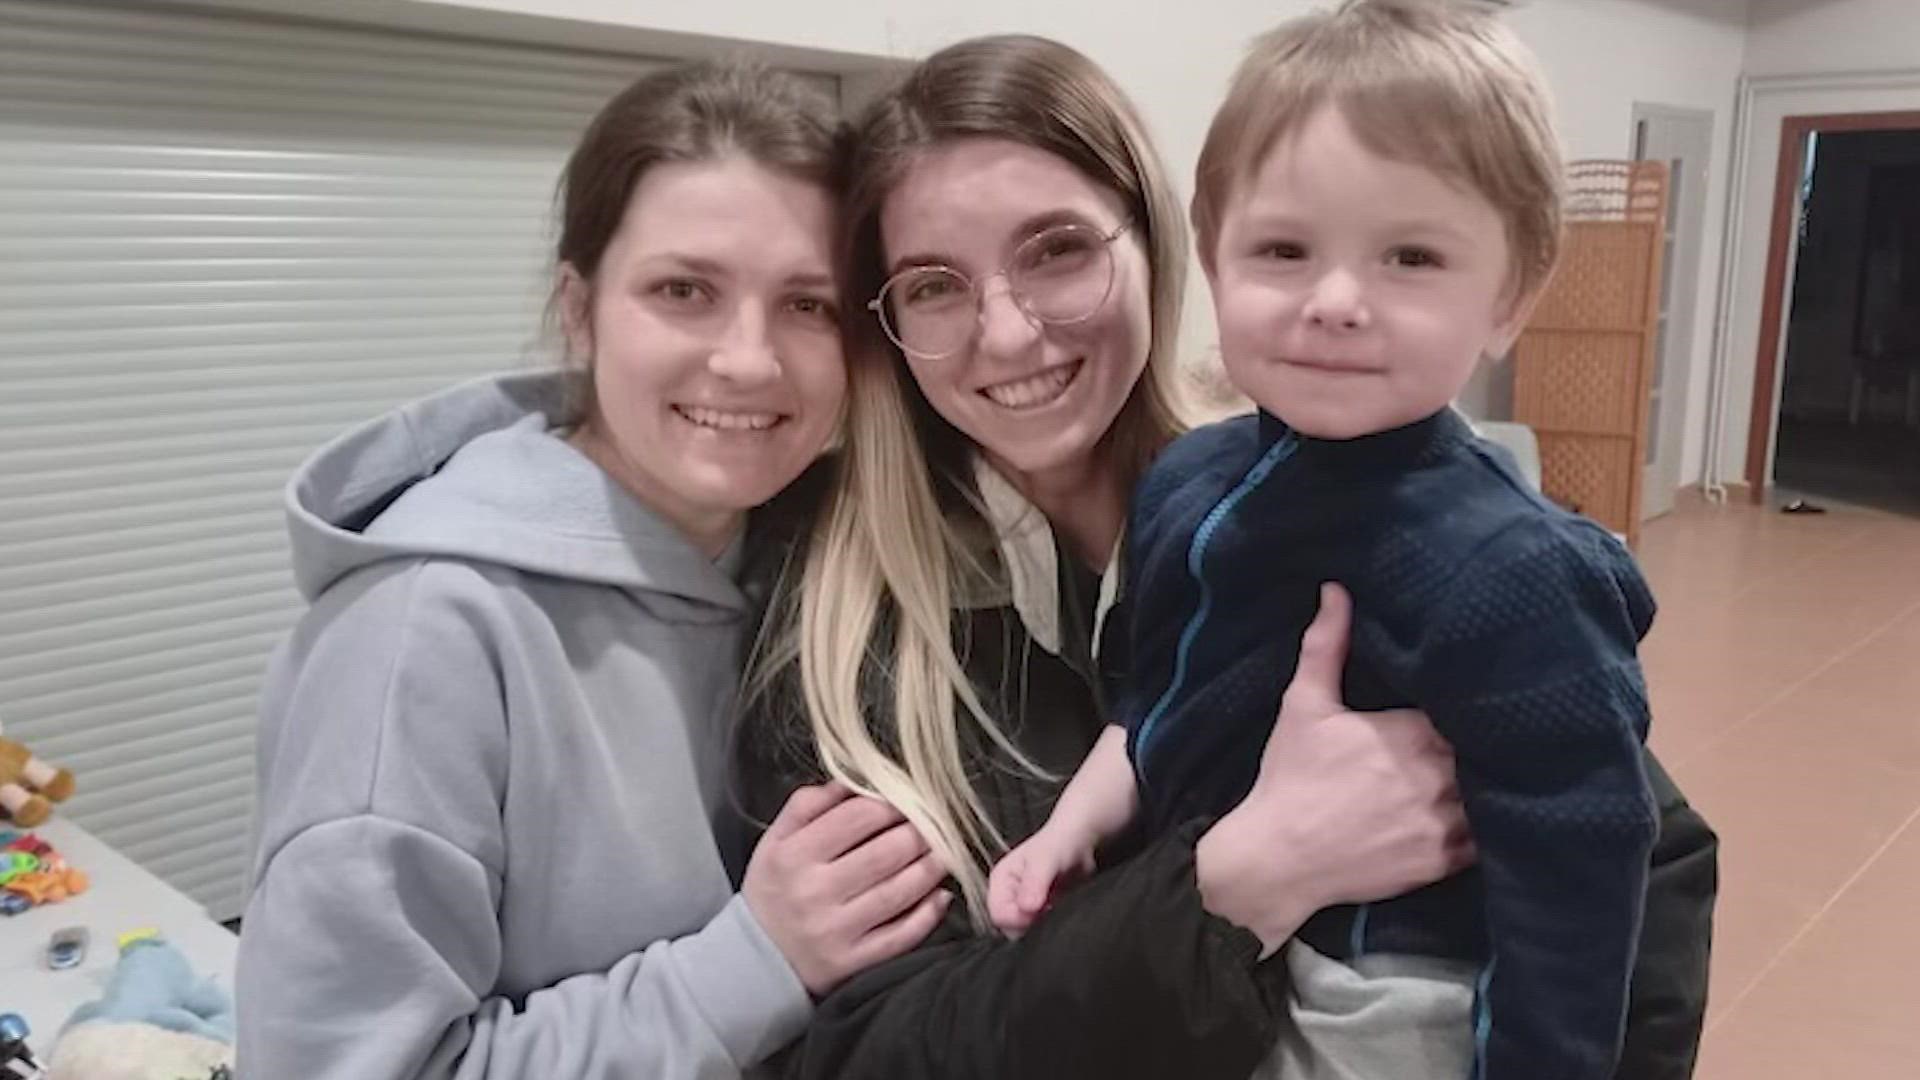 A young woman who was raised in Ukraine has spent several weeks advocating to bring her sister to the U.S. Now she is coming back home with her sister and nephew.